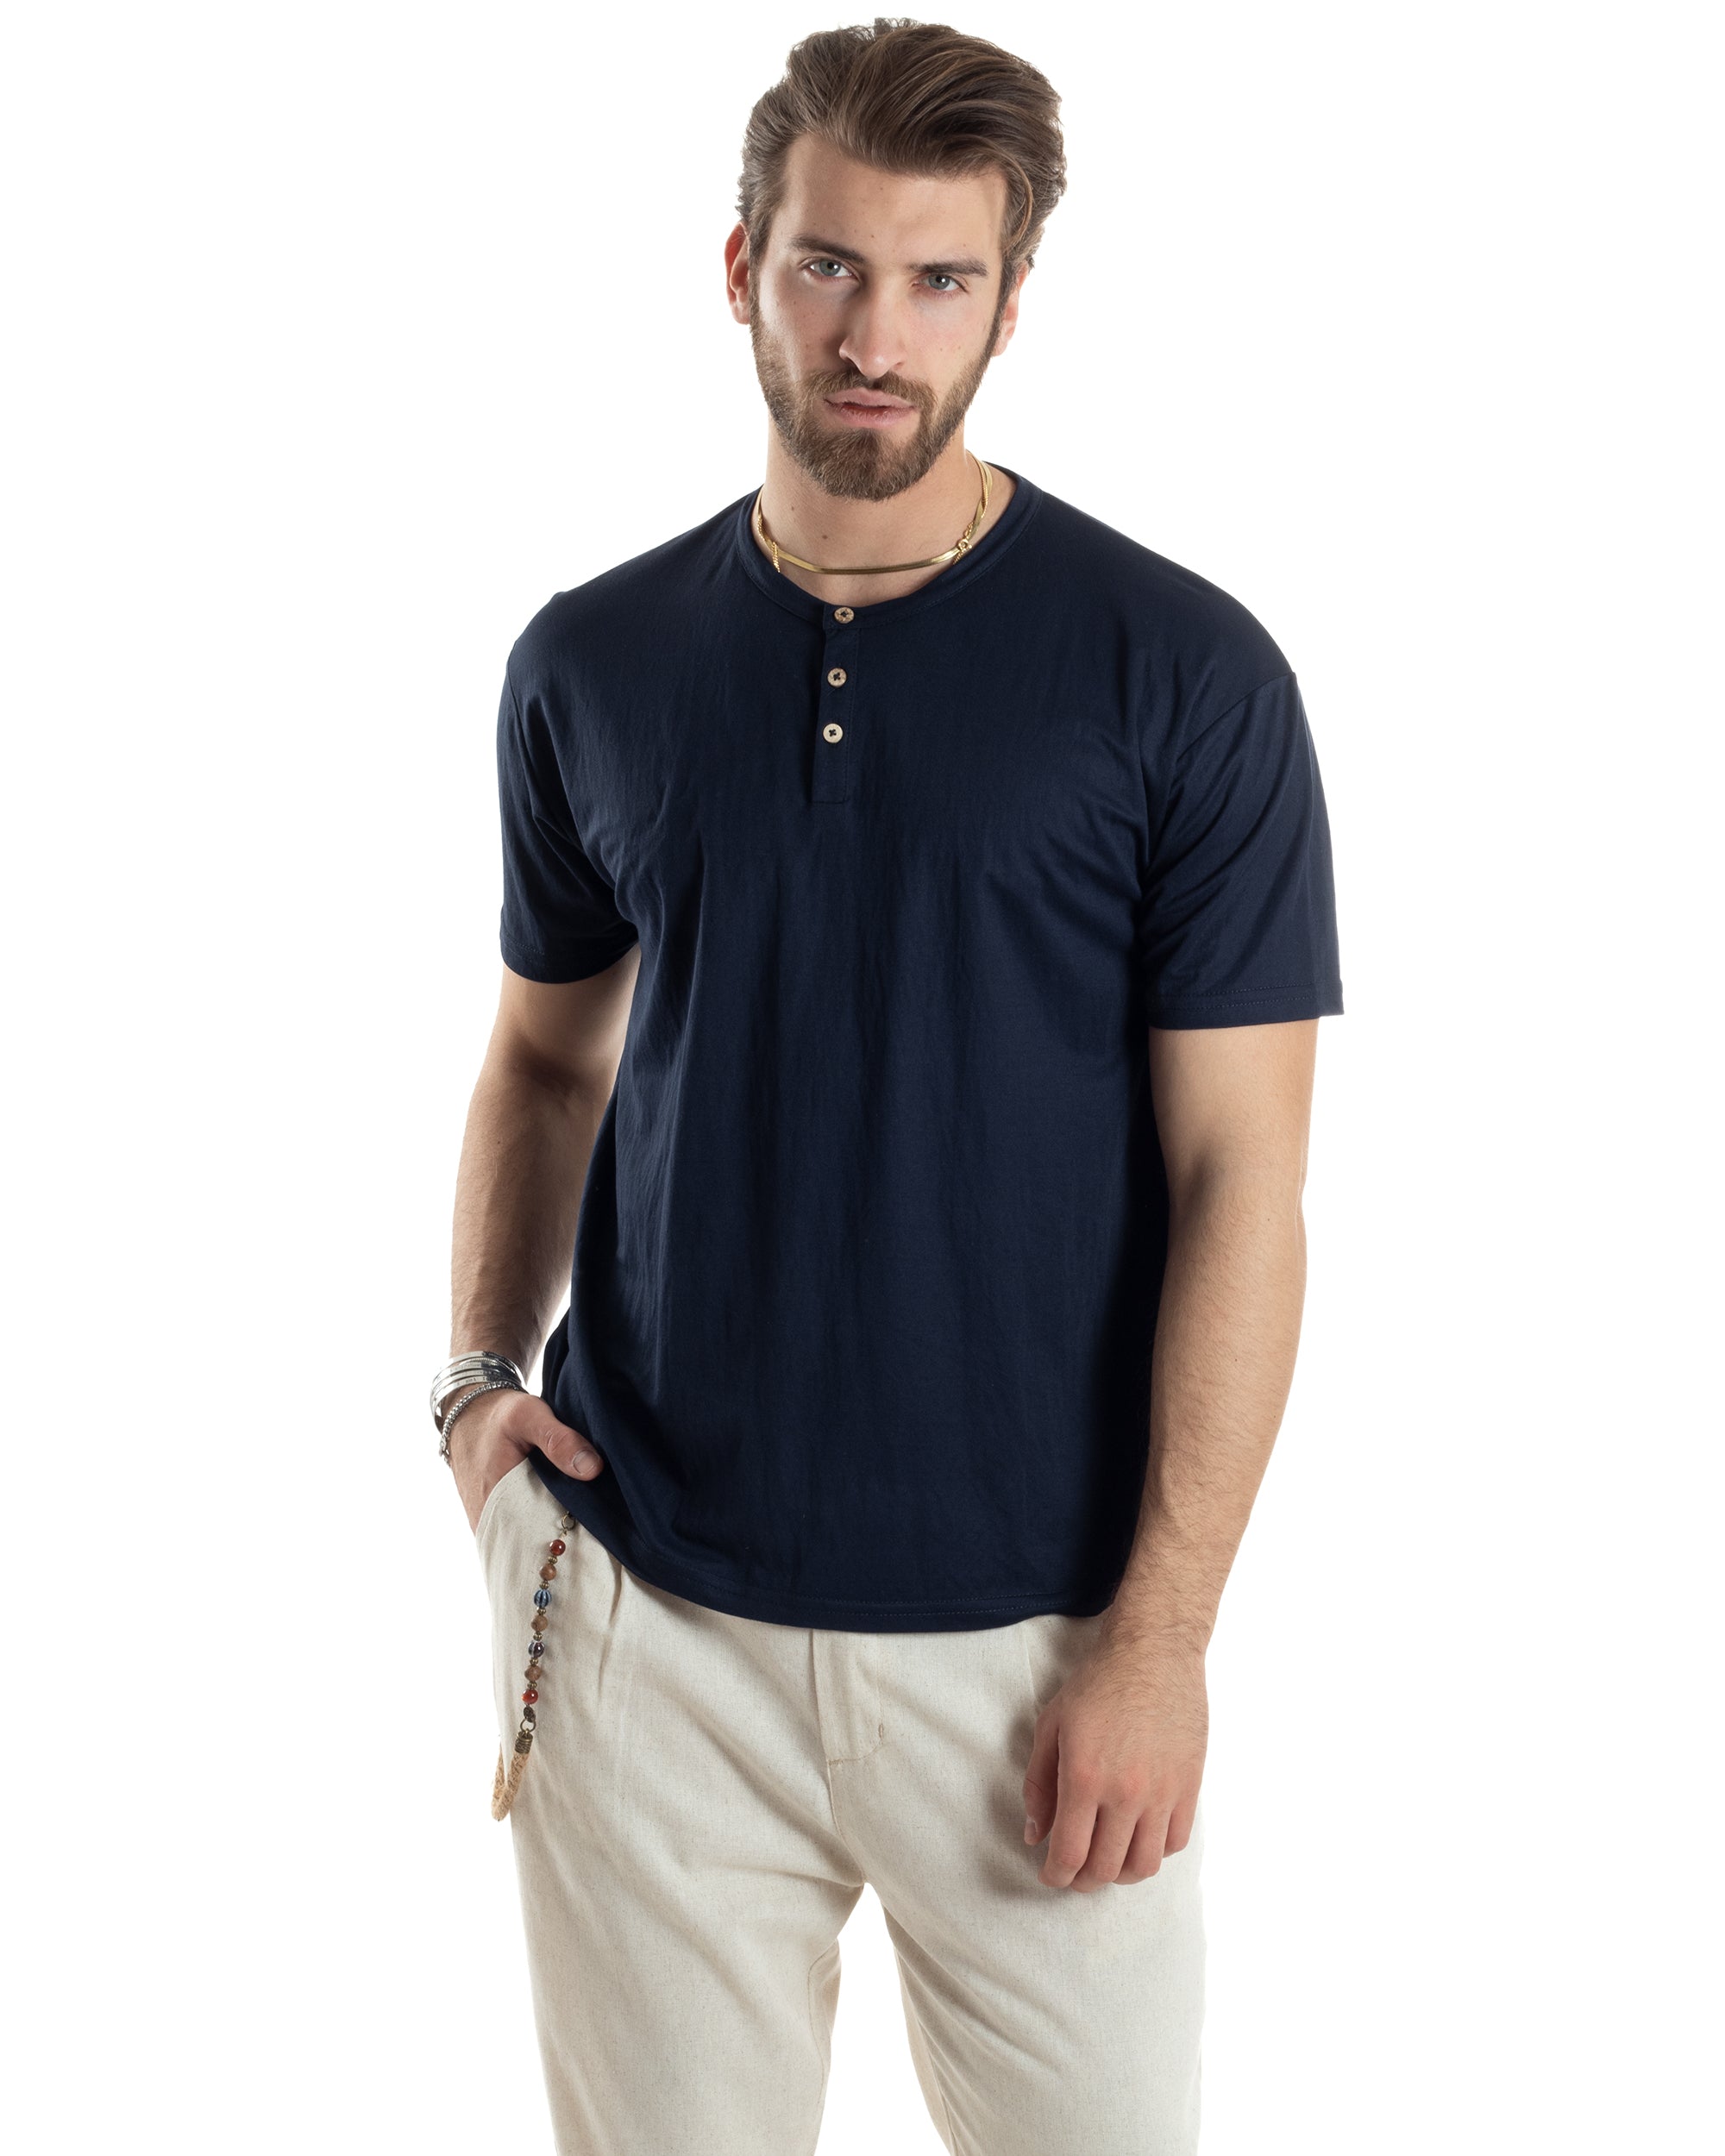 Men's T-shirt Seraph Collar Buttons Solid Color Short Sleeve Cotton Blue Casual GIOSAL-TS2959A